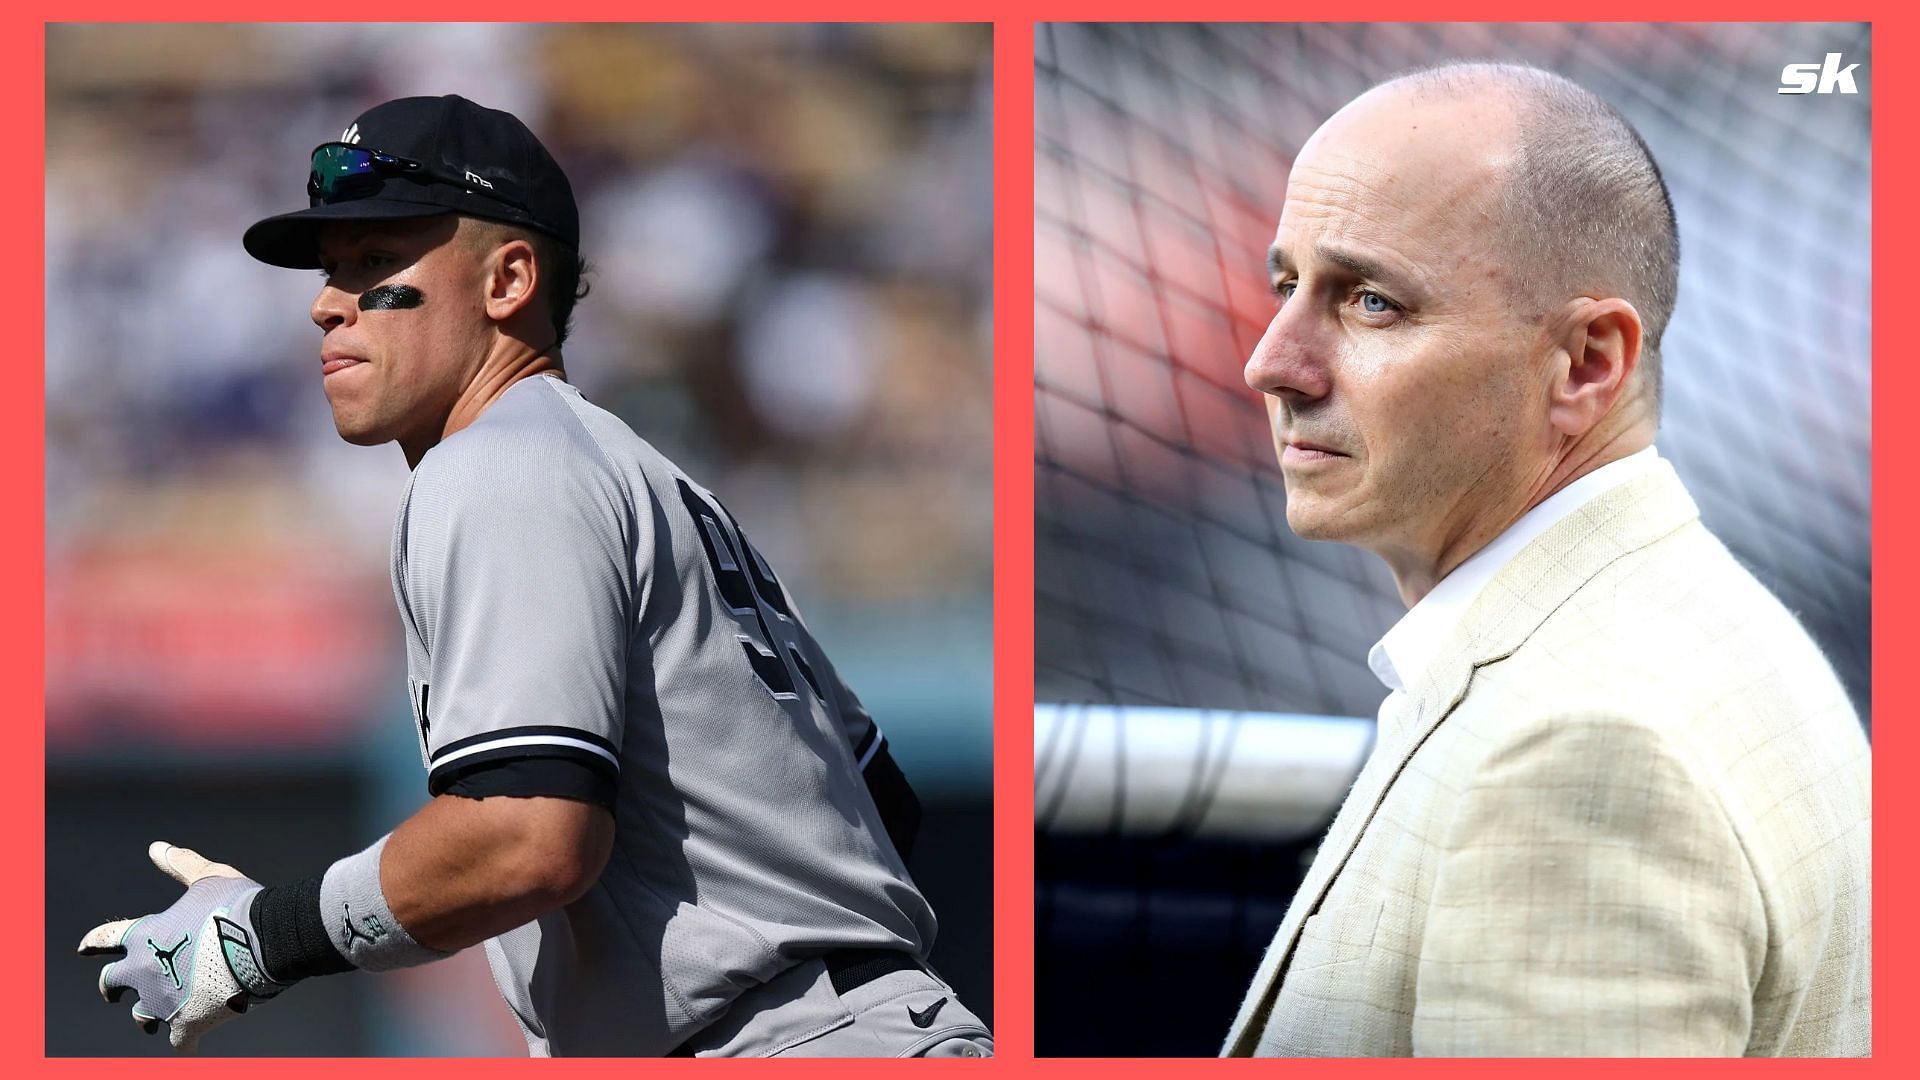 Yankees GM Brian Cashman pours cold water on Aaron Judge injury